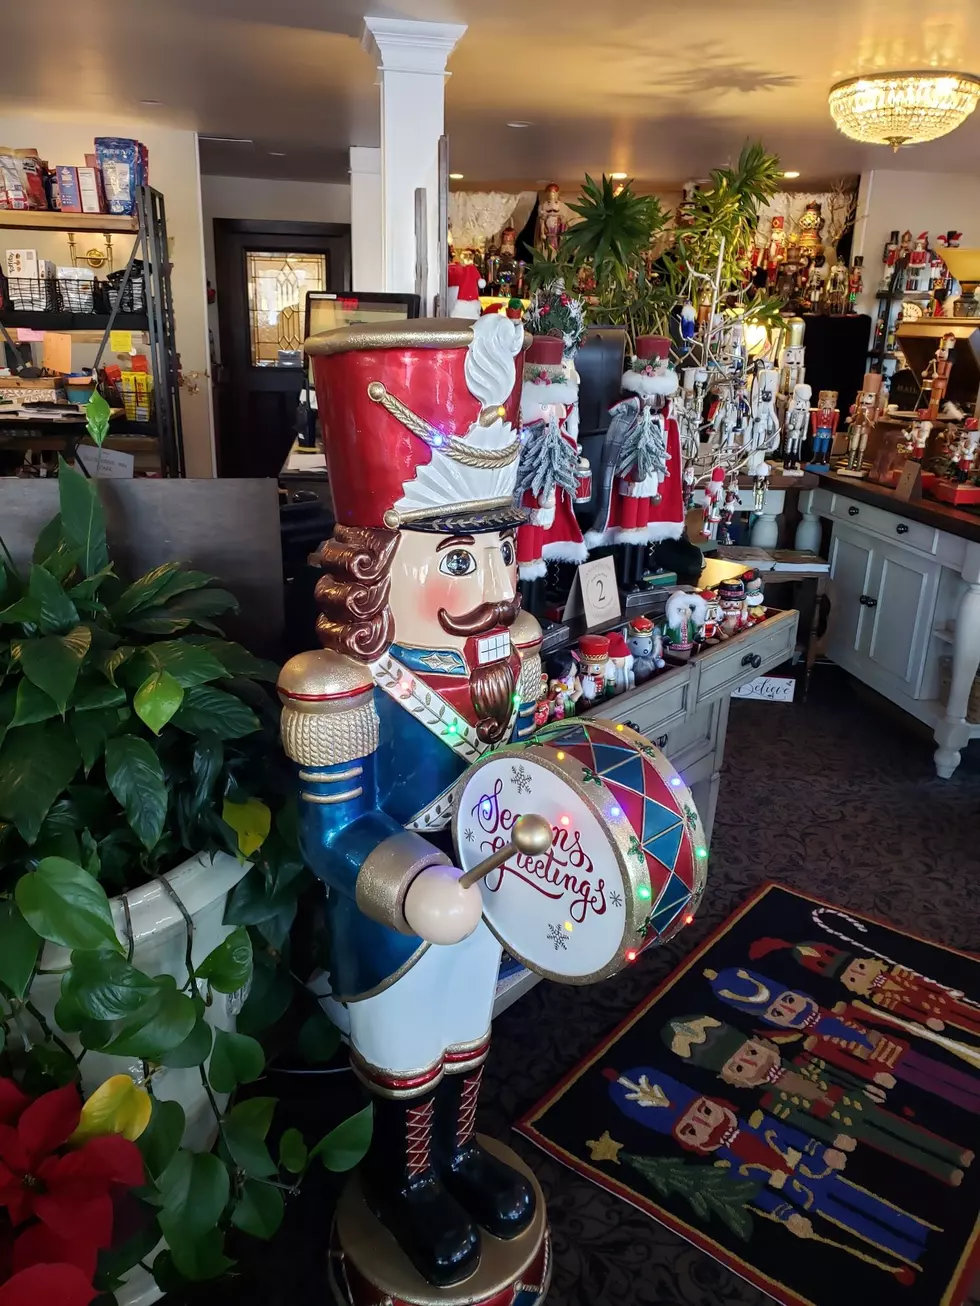 Montana Business Shares Spectacular One Of A Kind Holiday Display